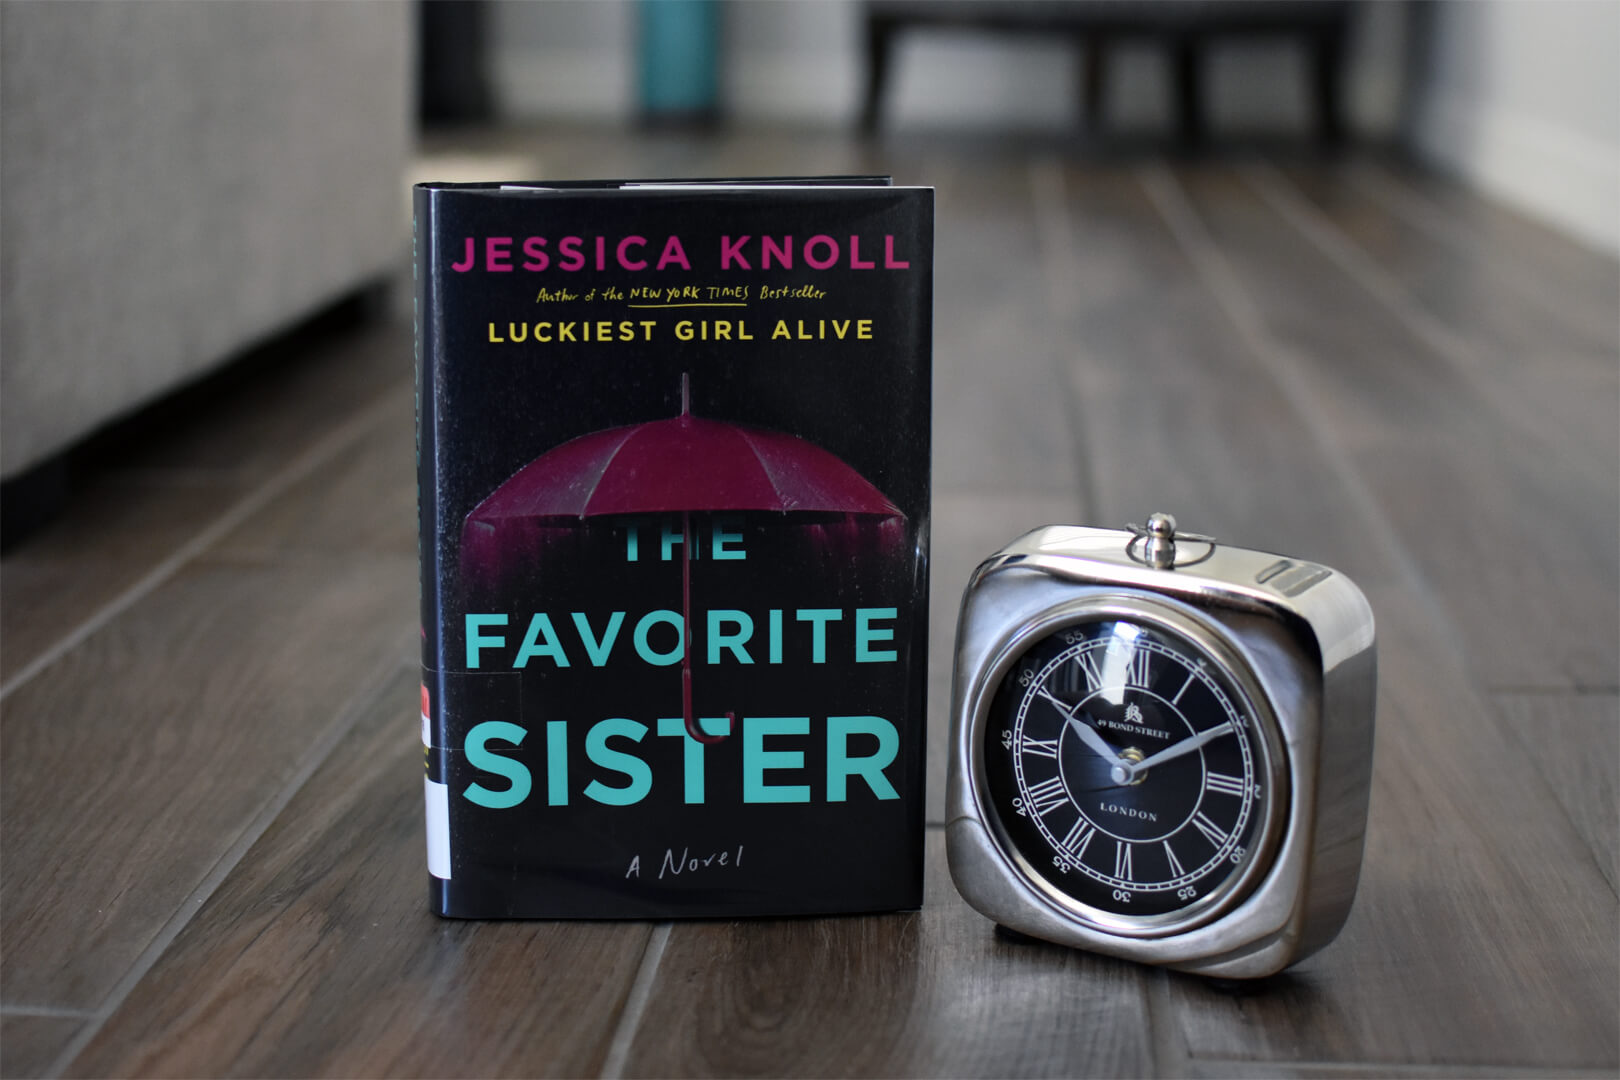 Review: The Favorite Sister by Jessica Knoll